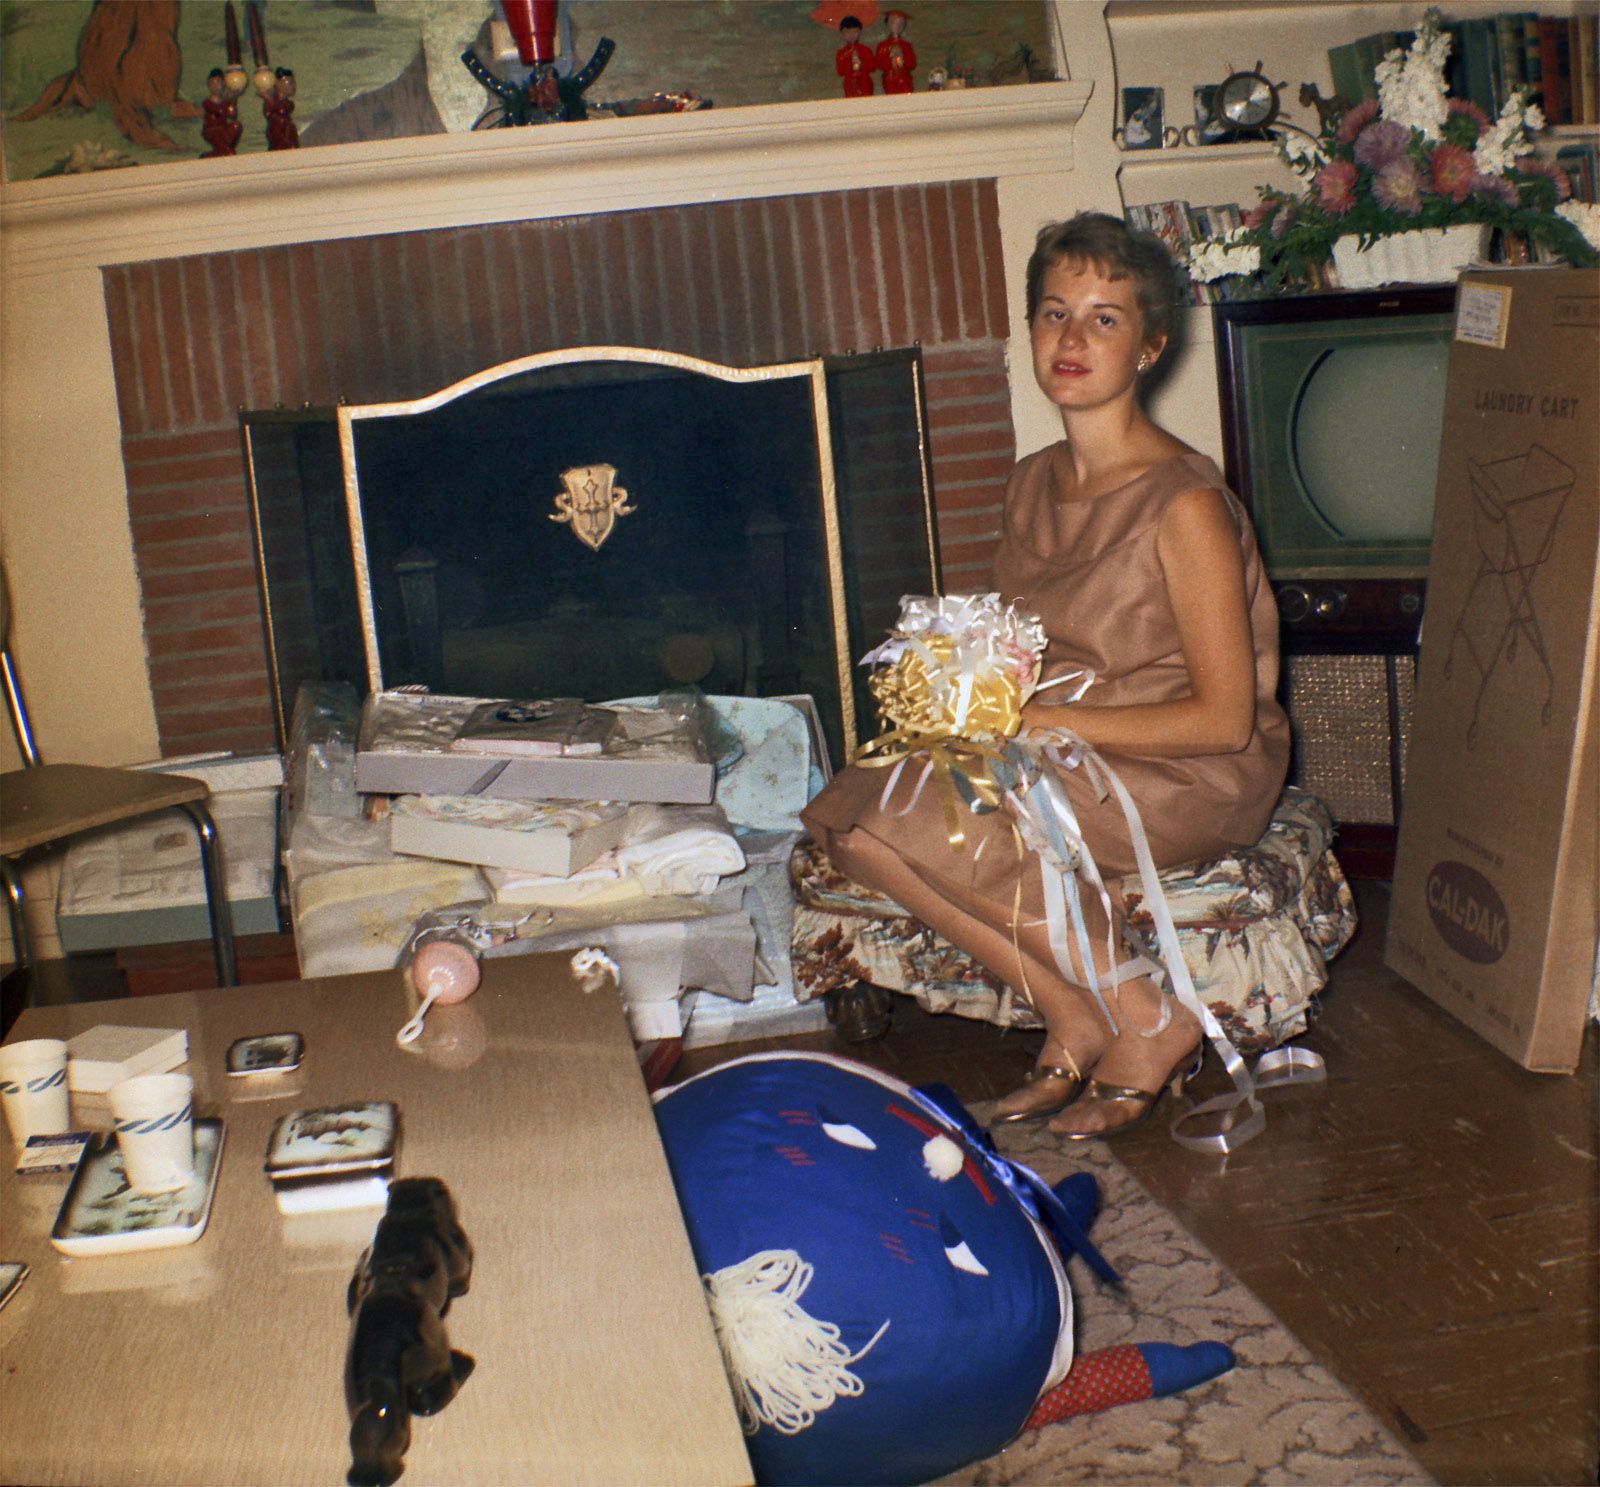 This is my grandma (who is no longer alive), pregnant with my father, making this around 1960. I'm fascinated by the mural above the fireplace and the little figures on top, but perhaps someone might know what the black thing on the table is? And, of course, the big blue thing and television are awesome. Scanned from a Kodak safety negative. View full size.